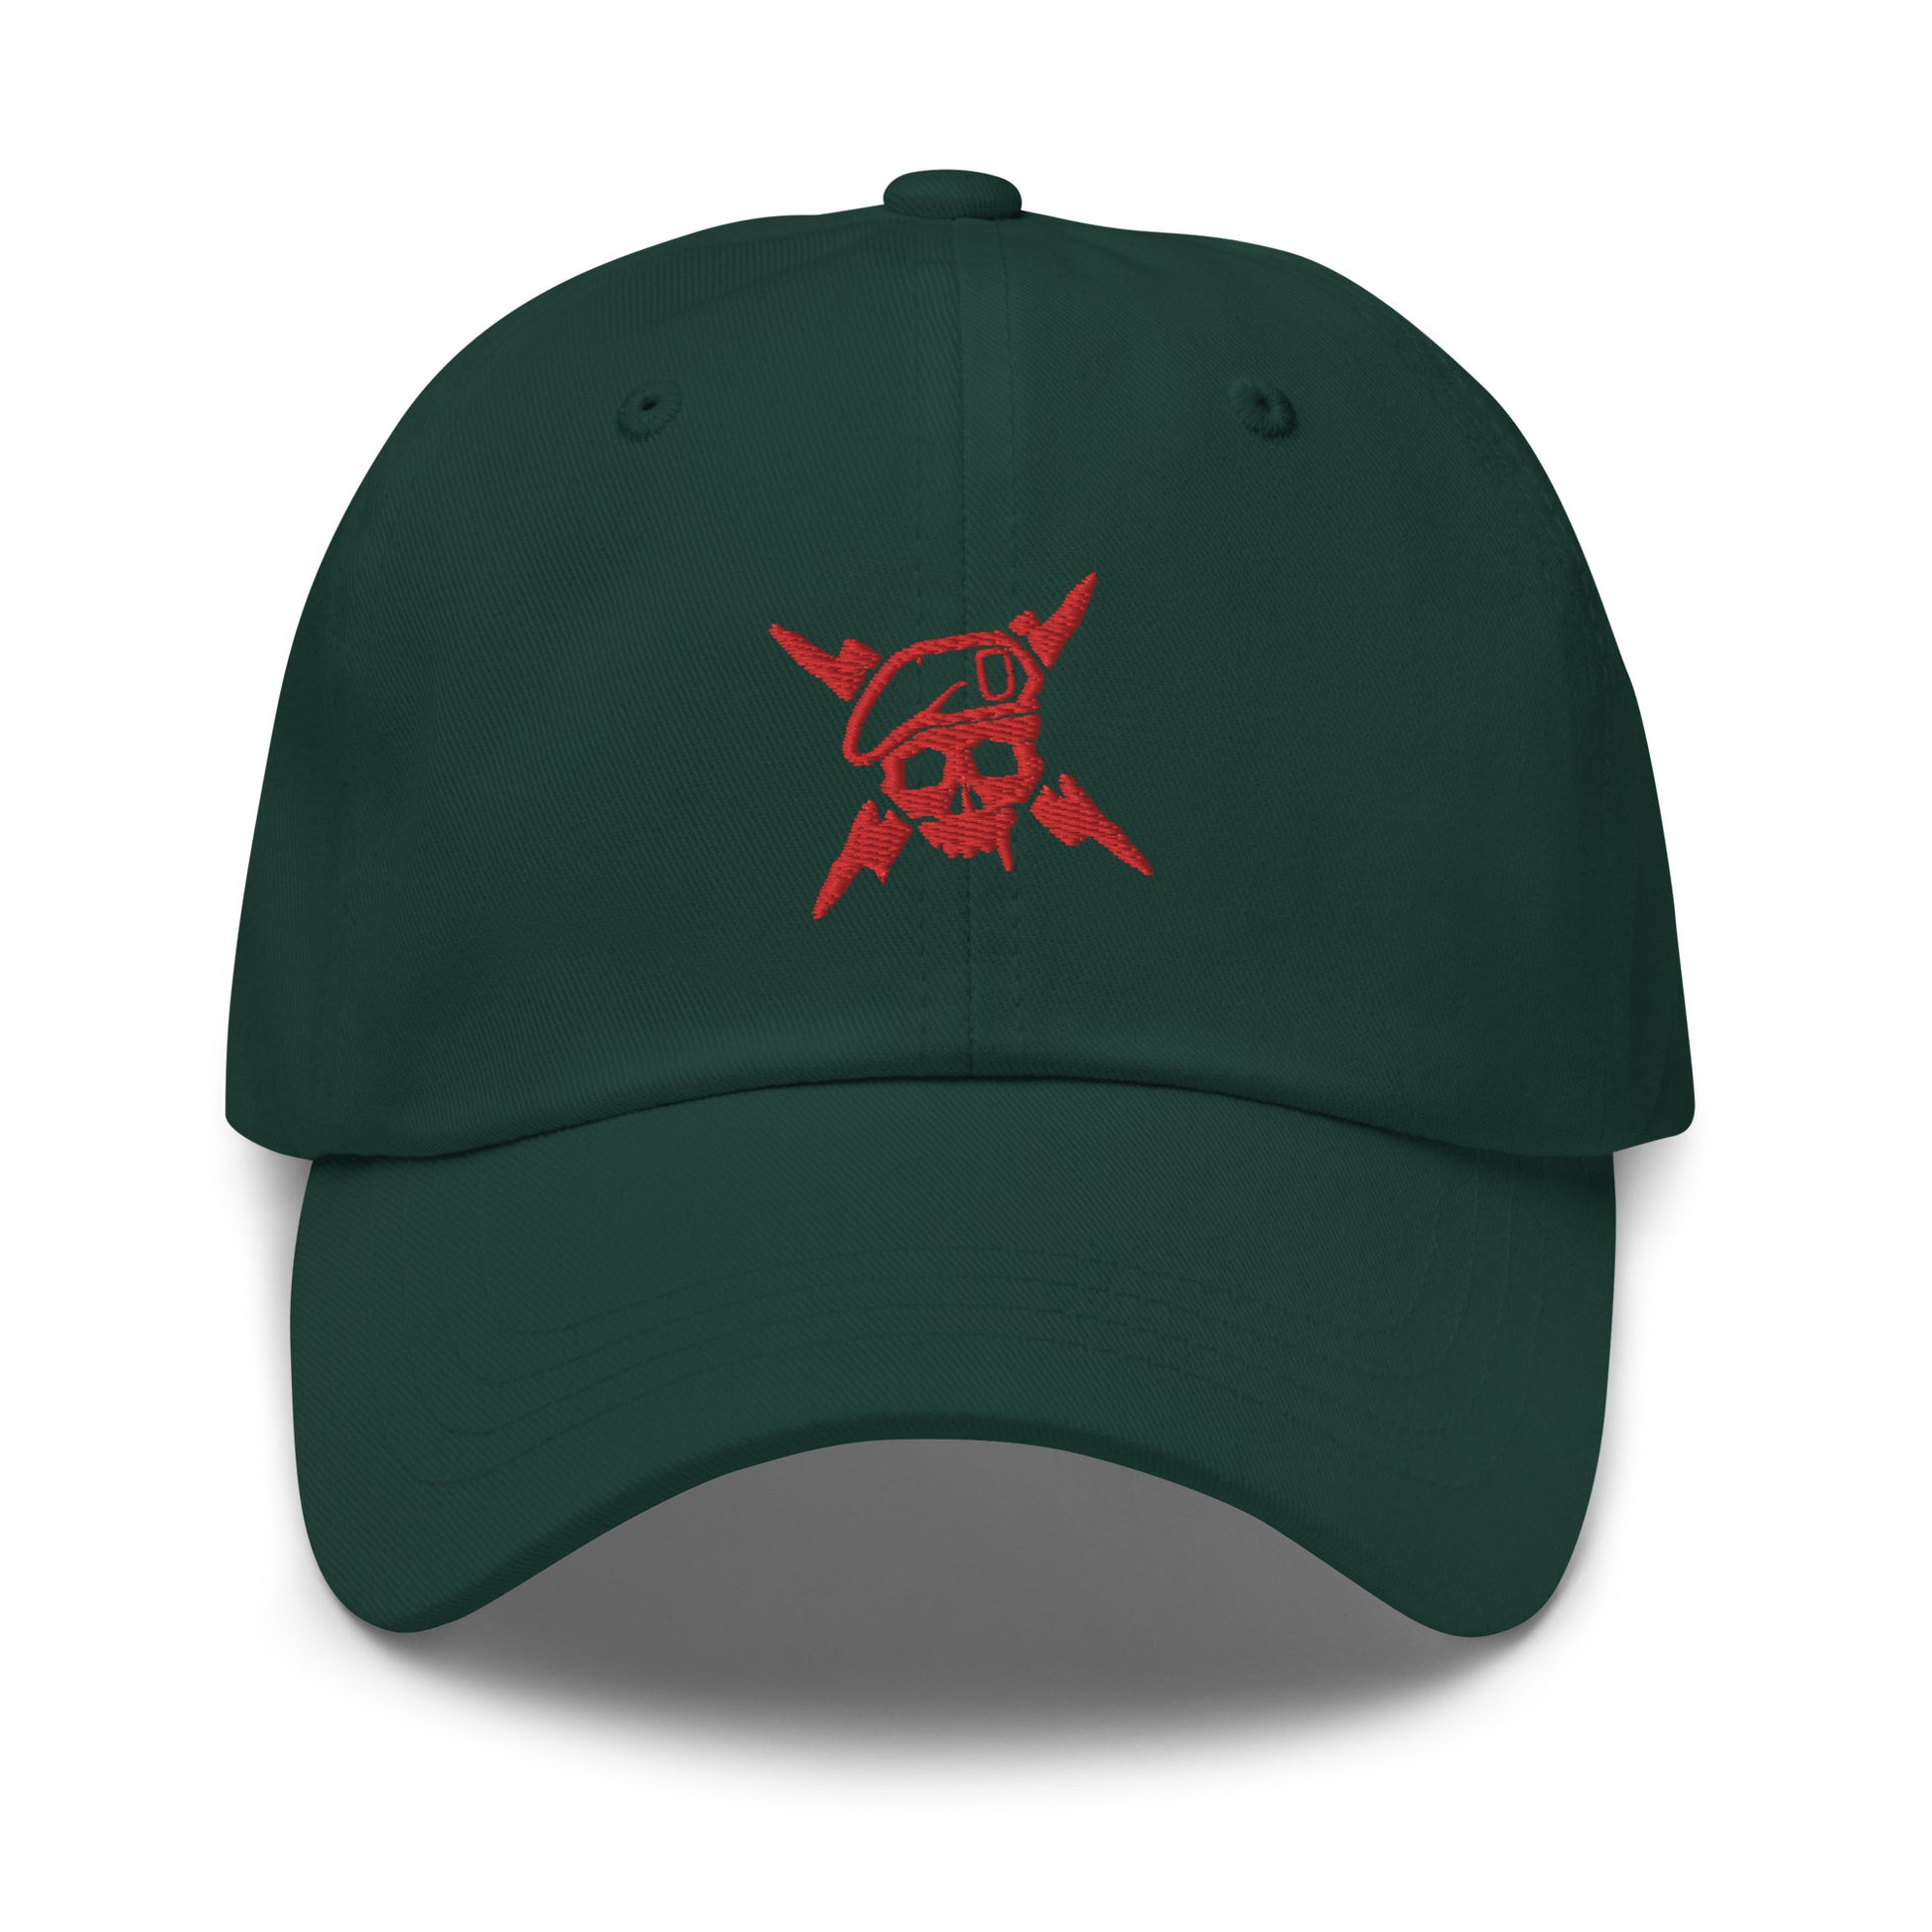 Green Dad hat - OVR & OUT